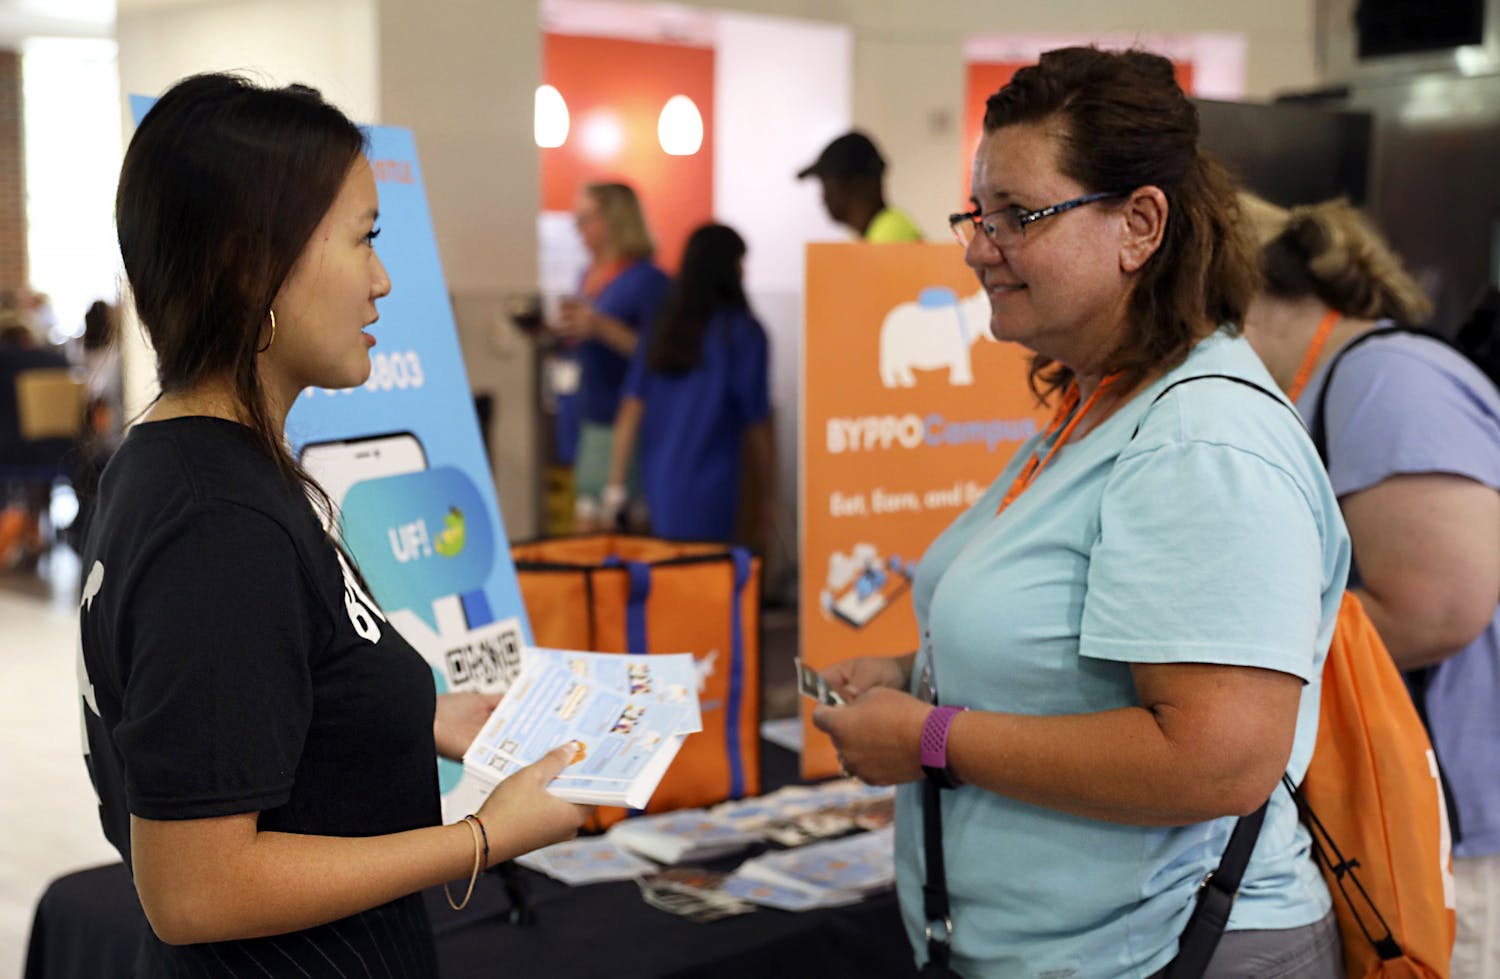 BYPPOCAMPUS founder and CEO Victoria Liu, (left) a UF accounting alumna, introduces her food delivery business to Stephanie Landini, (right) a parent of a UF student, at Gator Dining Center in Gainesville on Friday, July 9, 2021.